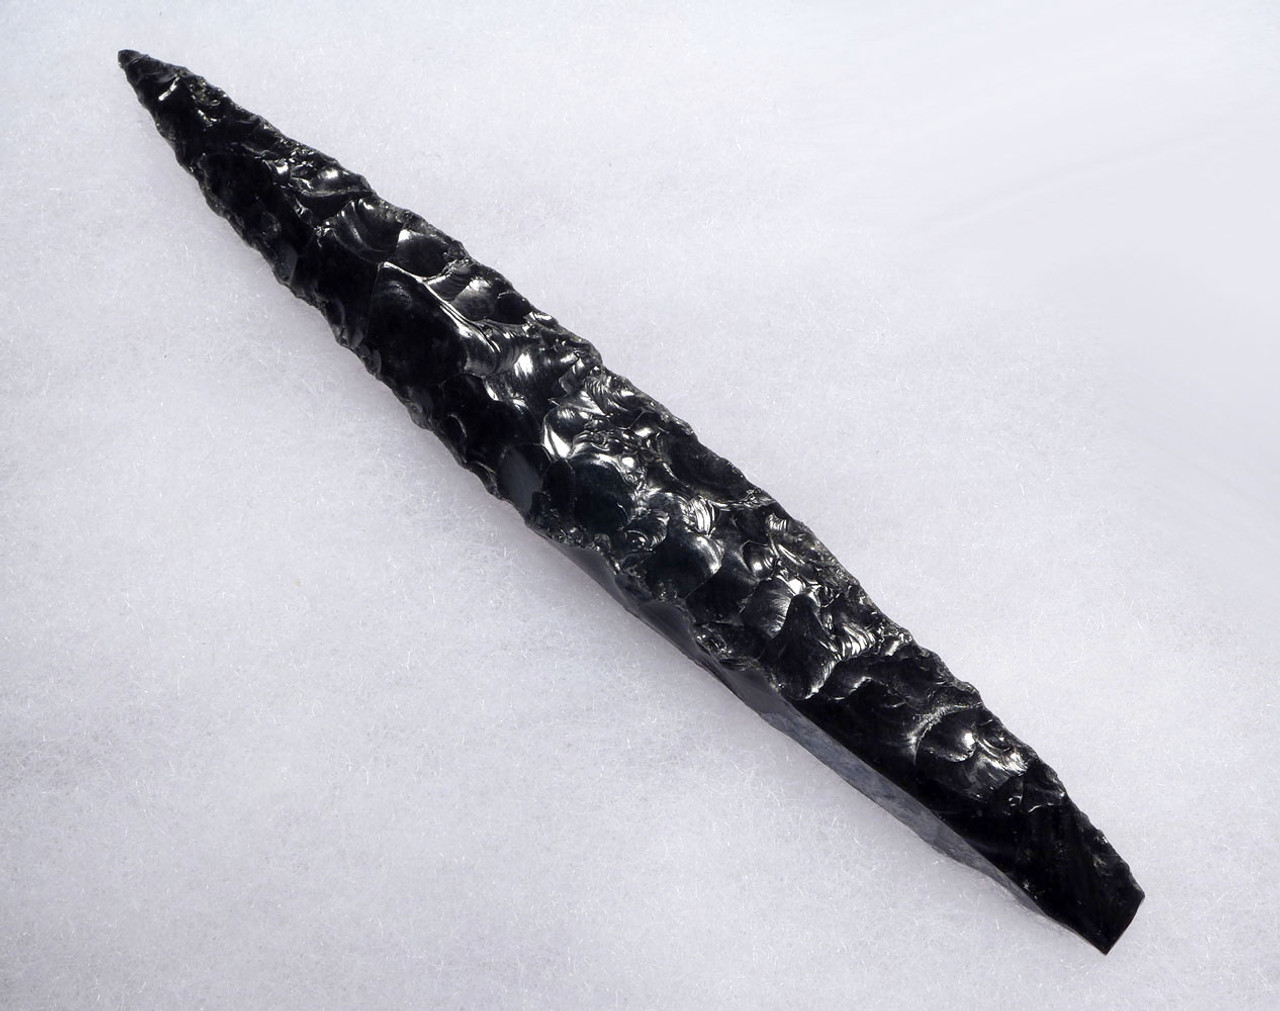 LARGE EXCEPTIONAL AZTEC BLOOD-LETTING OBSIDIAN PIERCER NEEDLE OF PRE-COLUMBIAN SACRIFICE RITUAL  *PC414